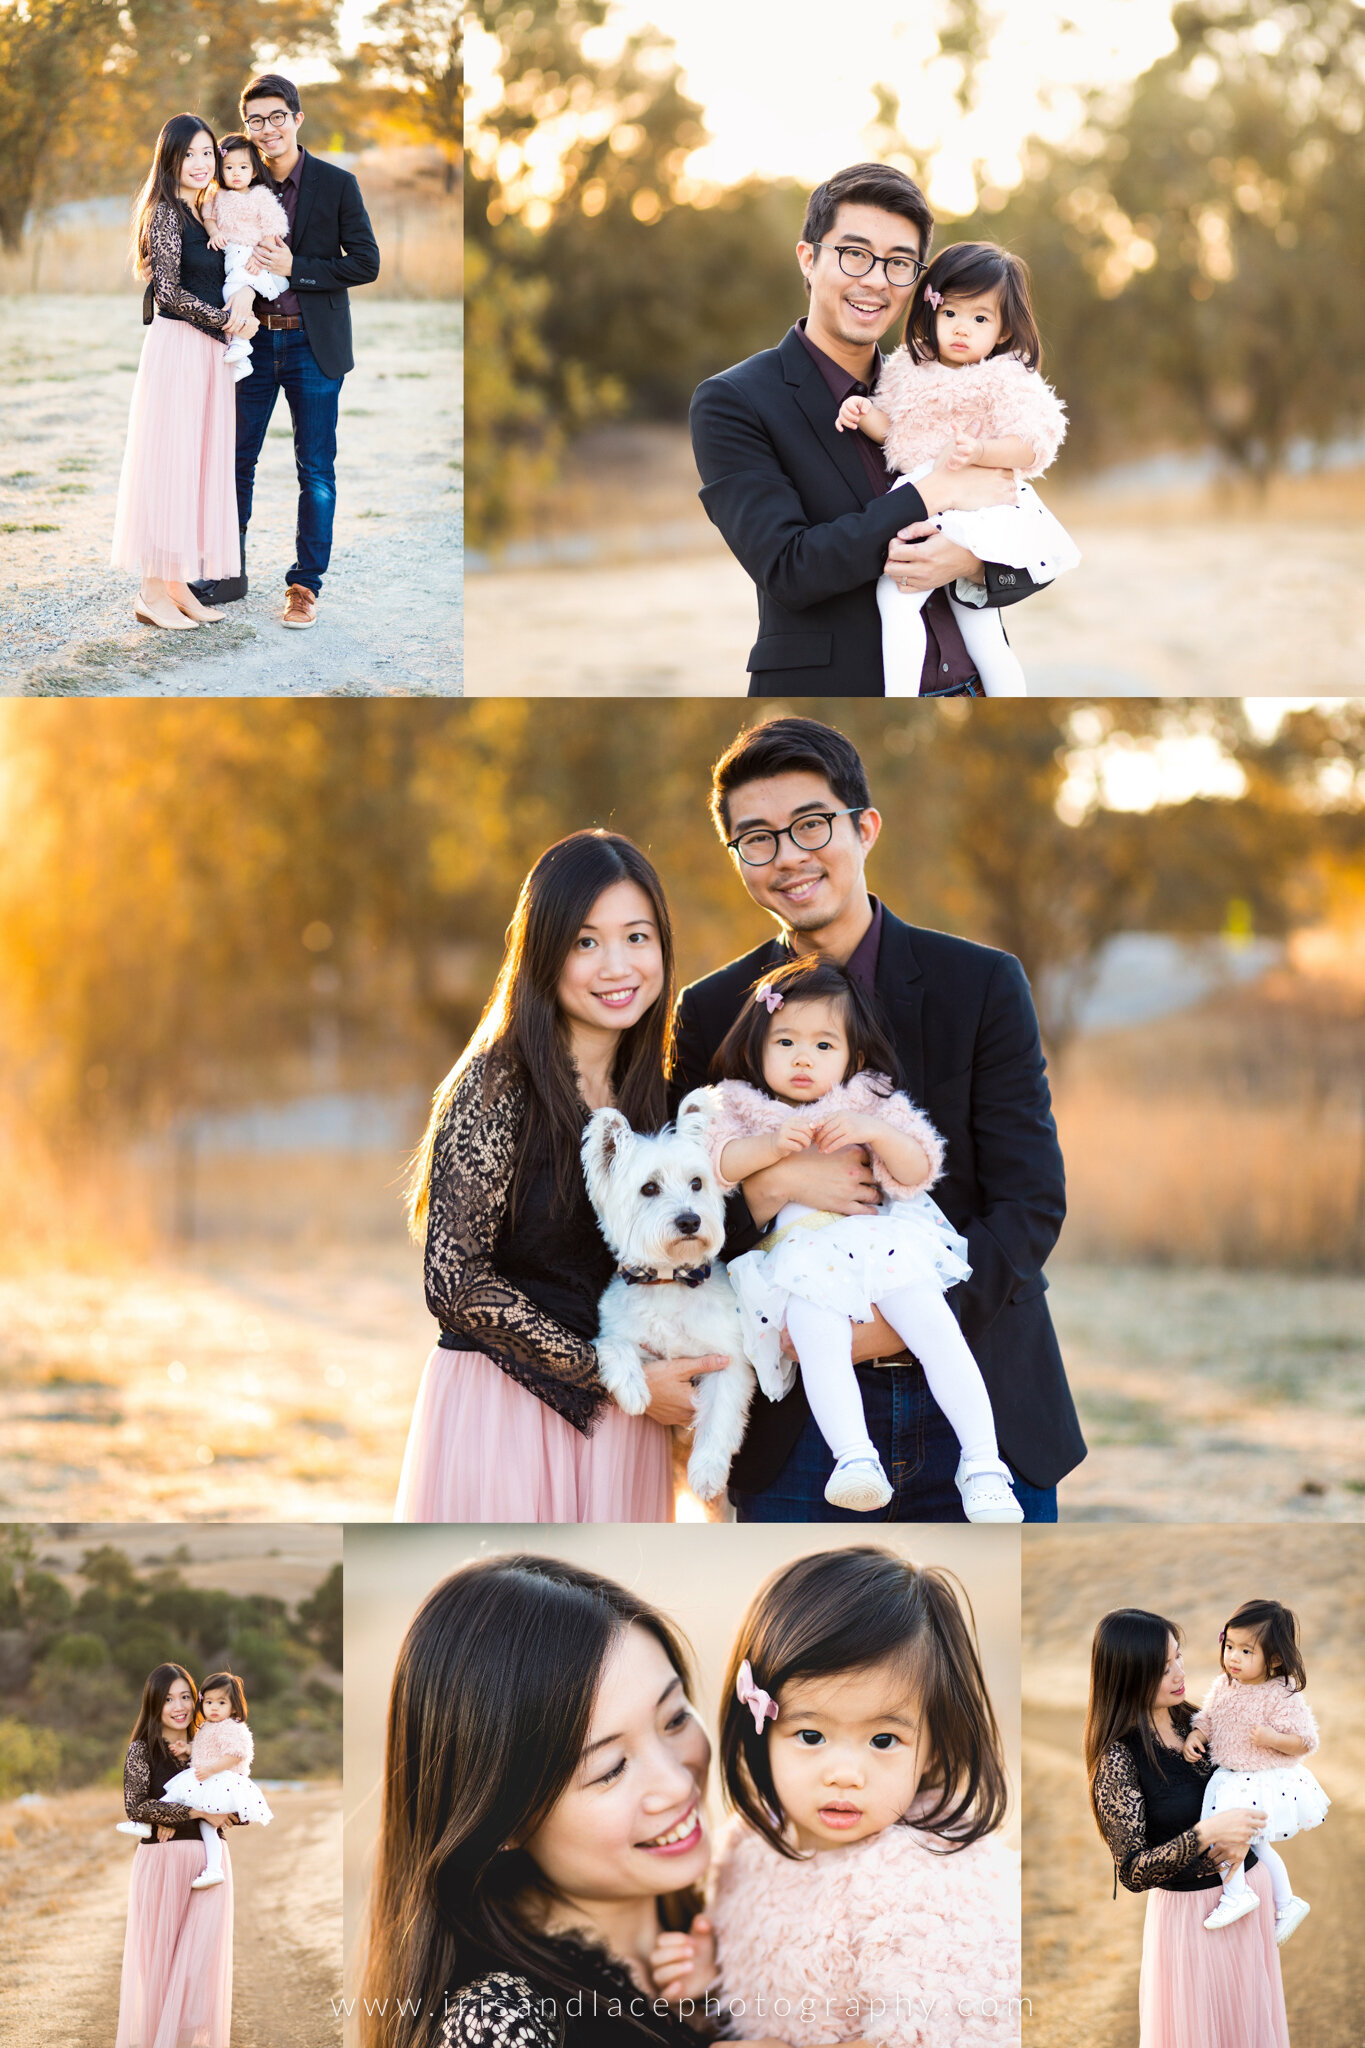 Lifestyle and Outdoor Family Photos in Palo Alto  |  Silicon Valley Family Photographer  |  Iris and Lace Photography